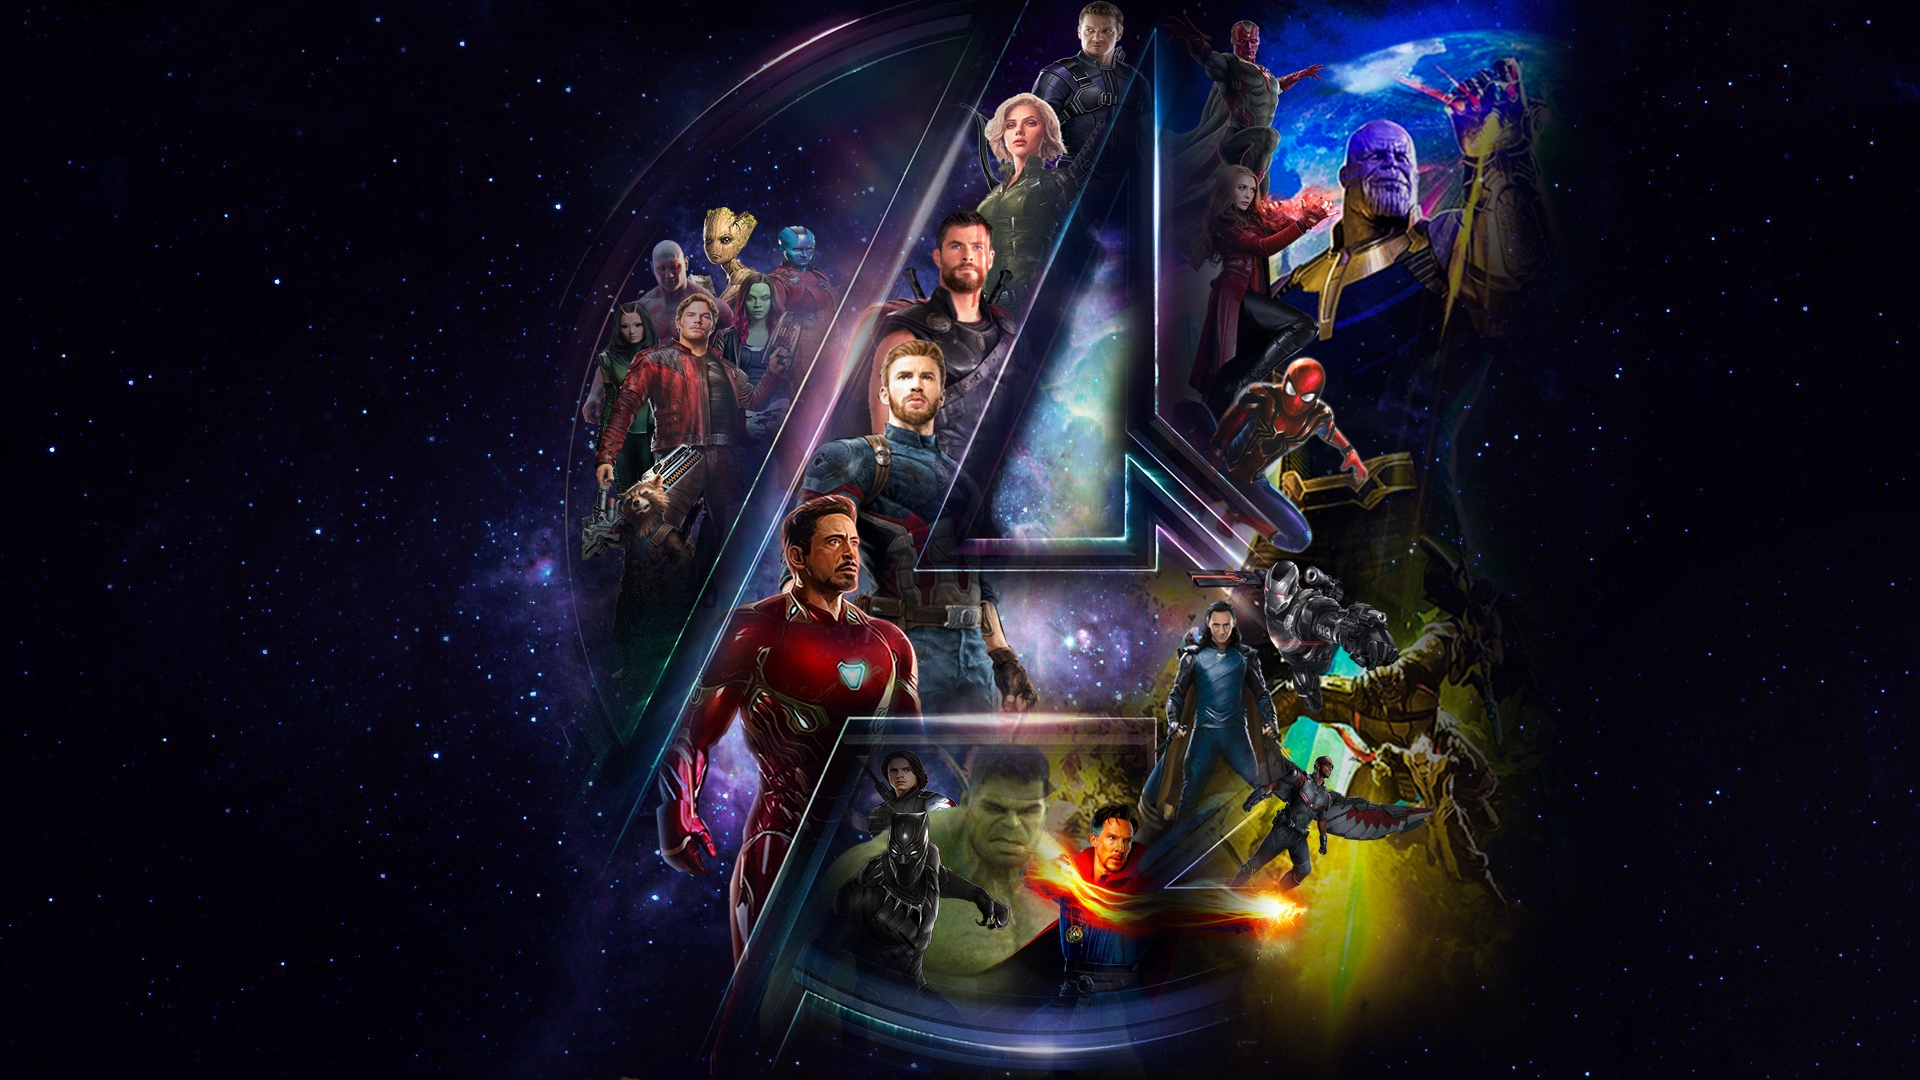 the avengers infinity war free full movie download